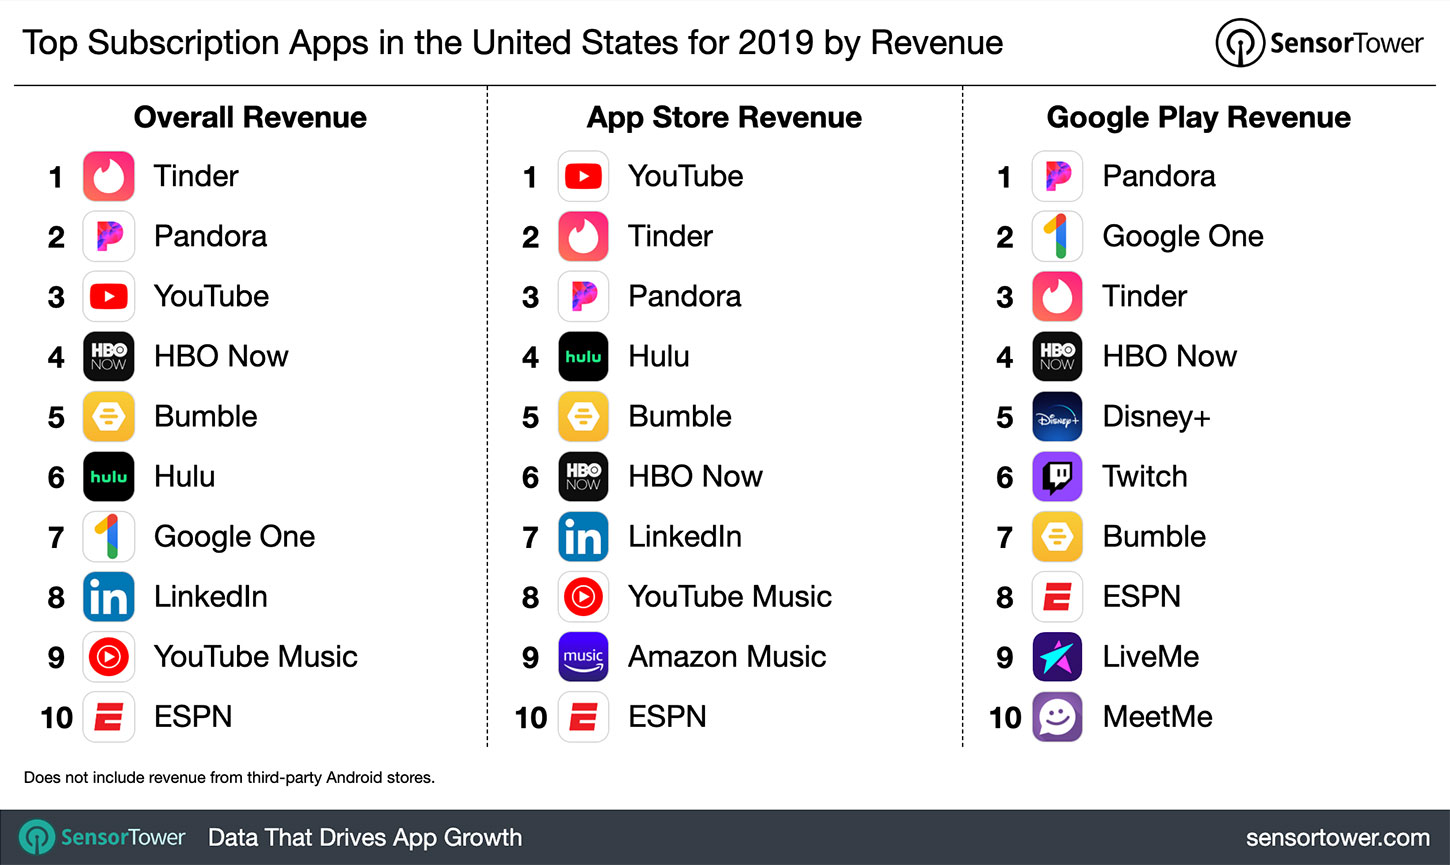 top-subscription-apps-united-states-2019-revenue.jpg